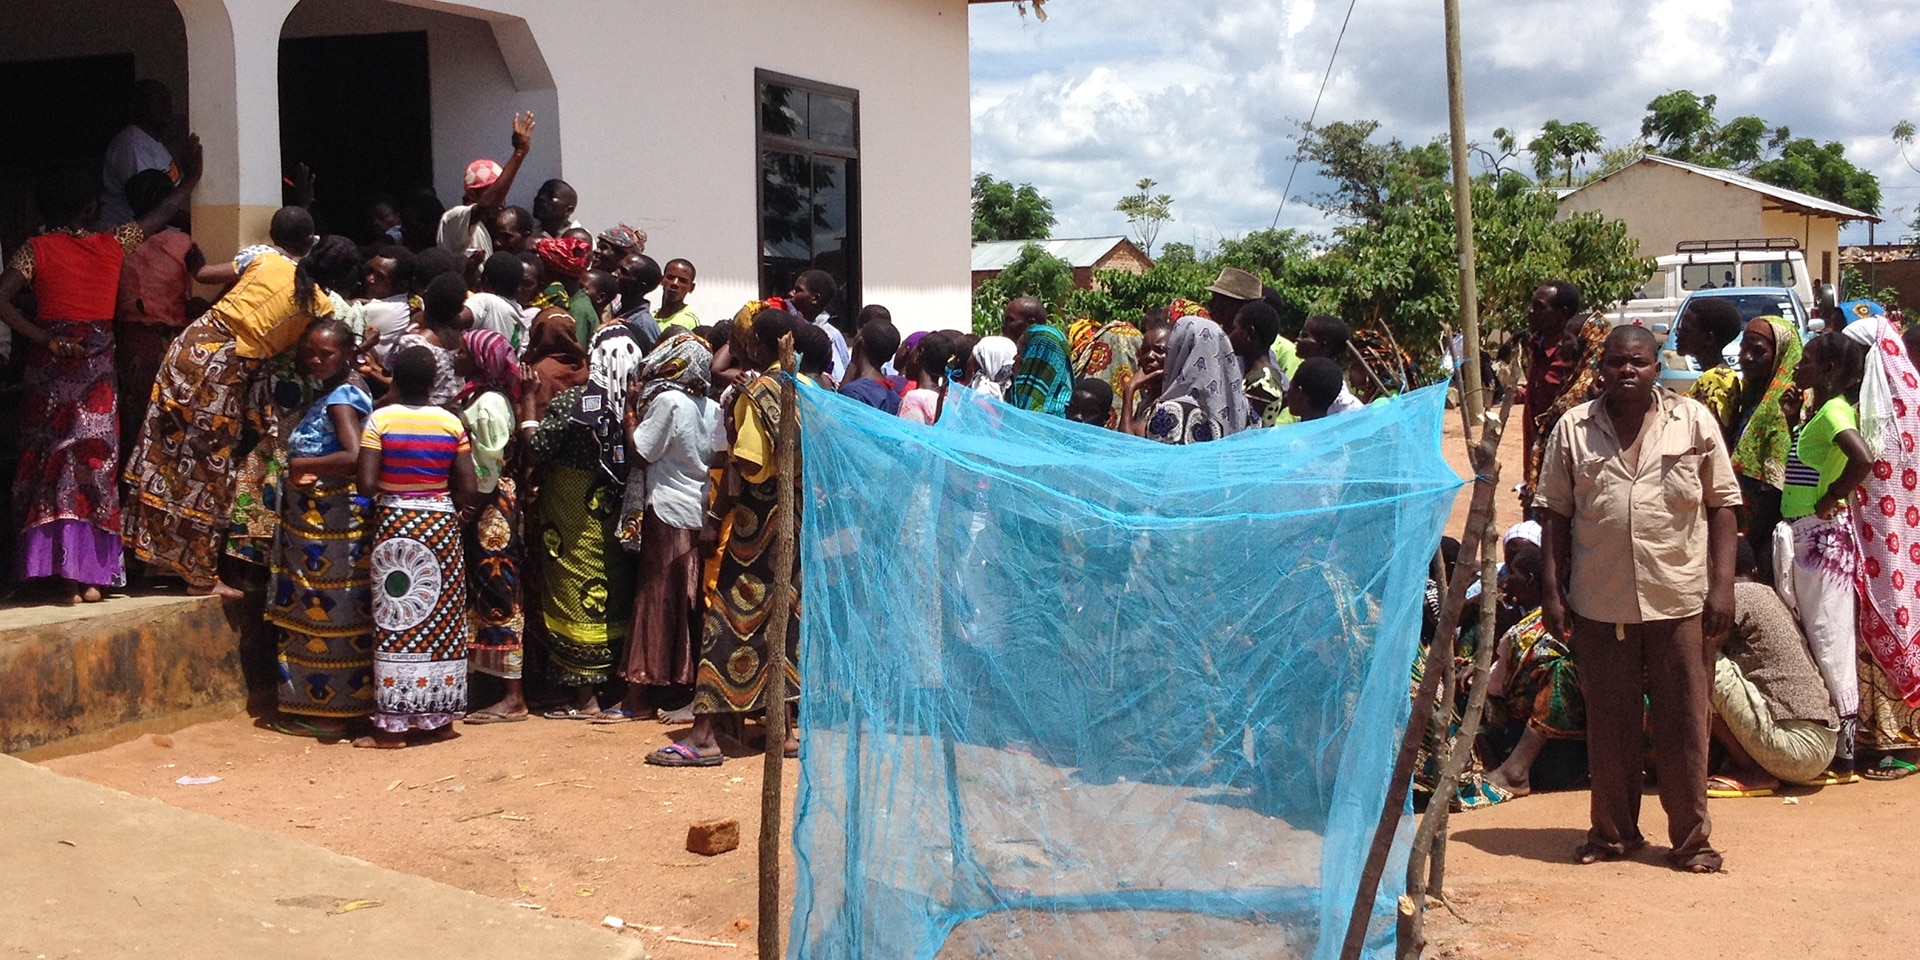 In a village in Tanzania, many people are queuing to collect their mosquito nets. In the foreground, a blue mosquito net.